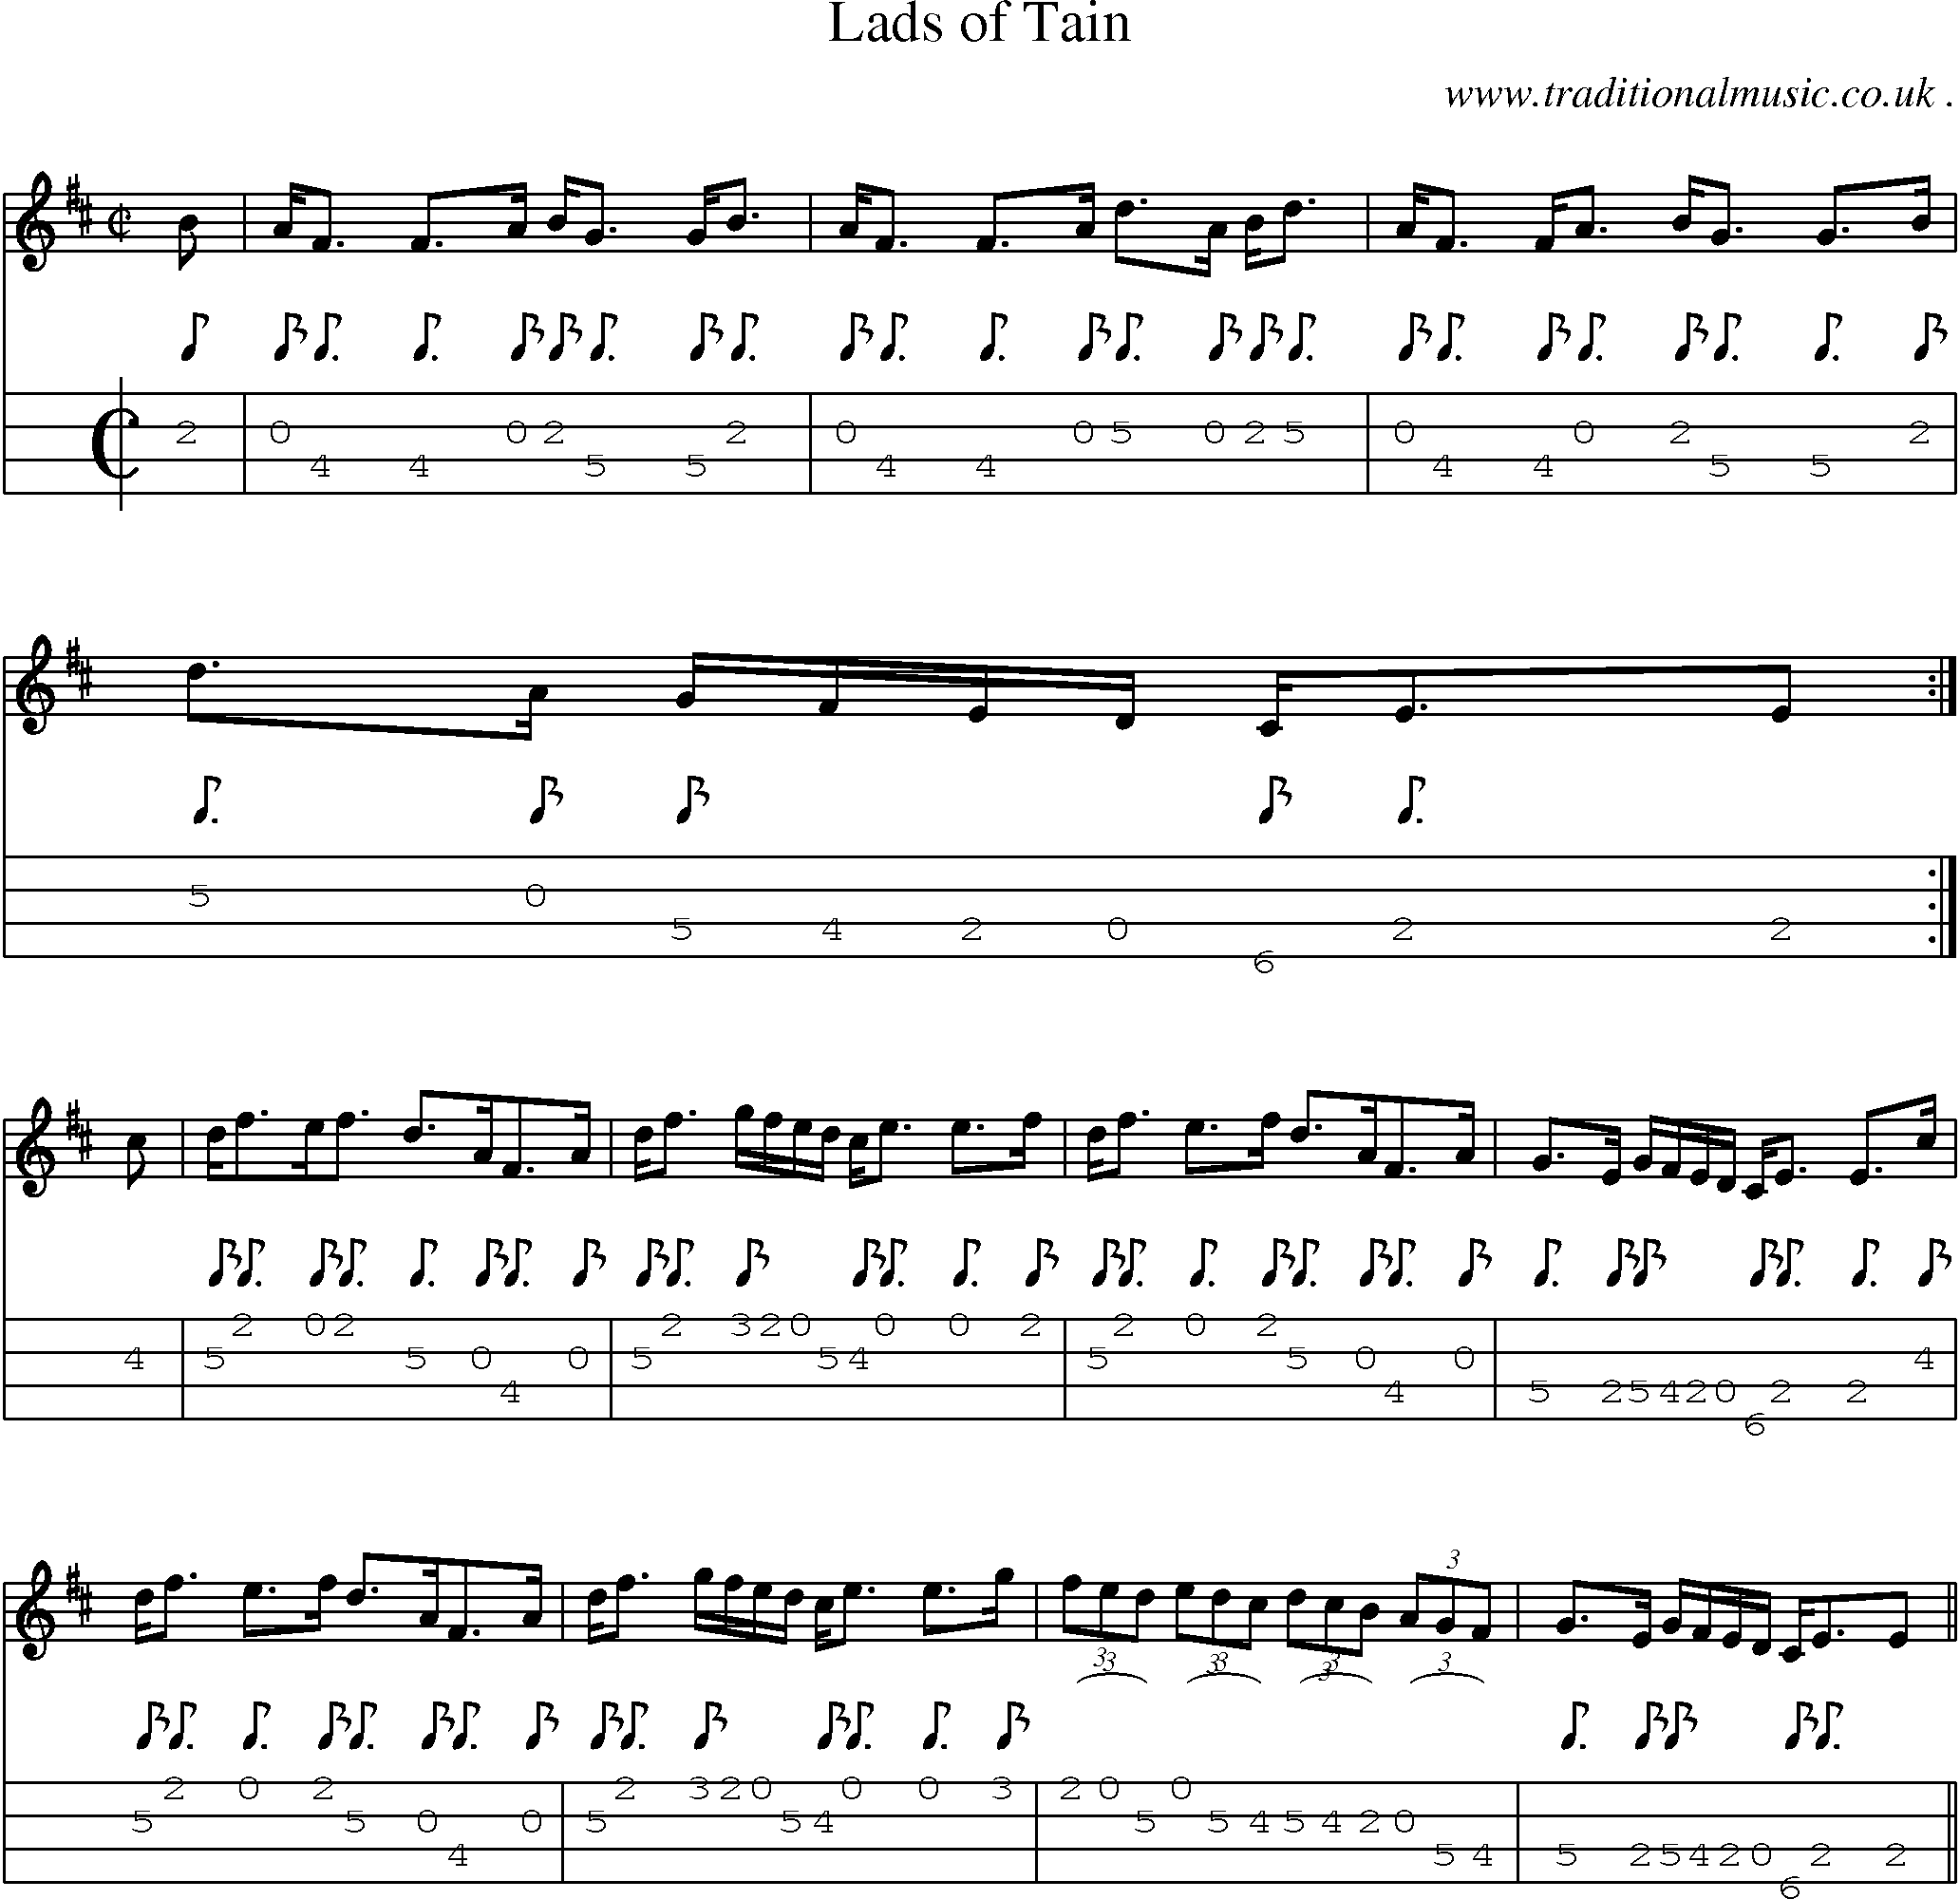 Sheet-music  score, Chords and Mandolin Tabs for Lads Of Tain